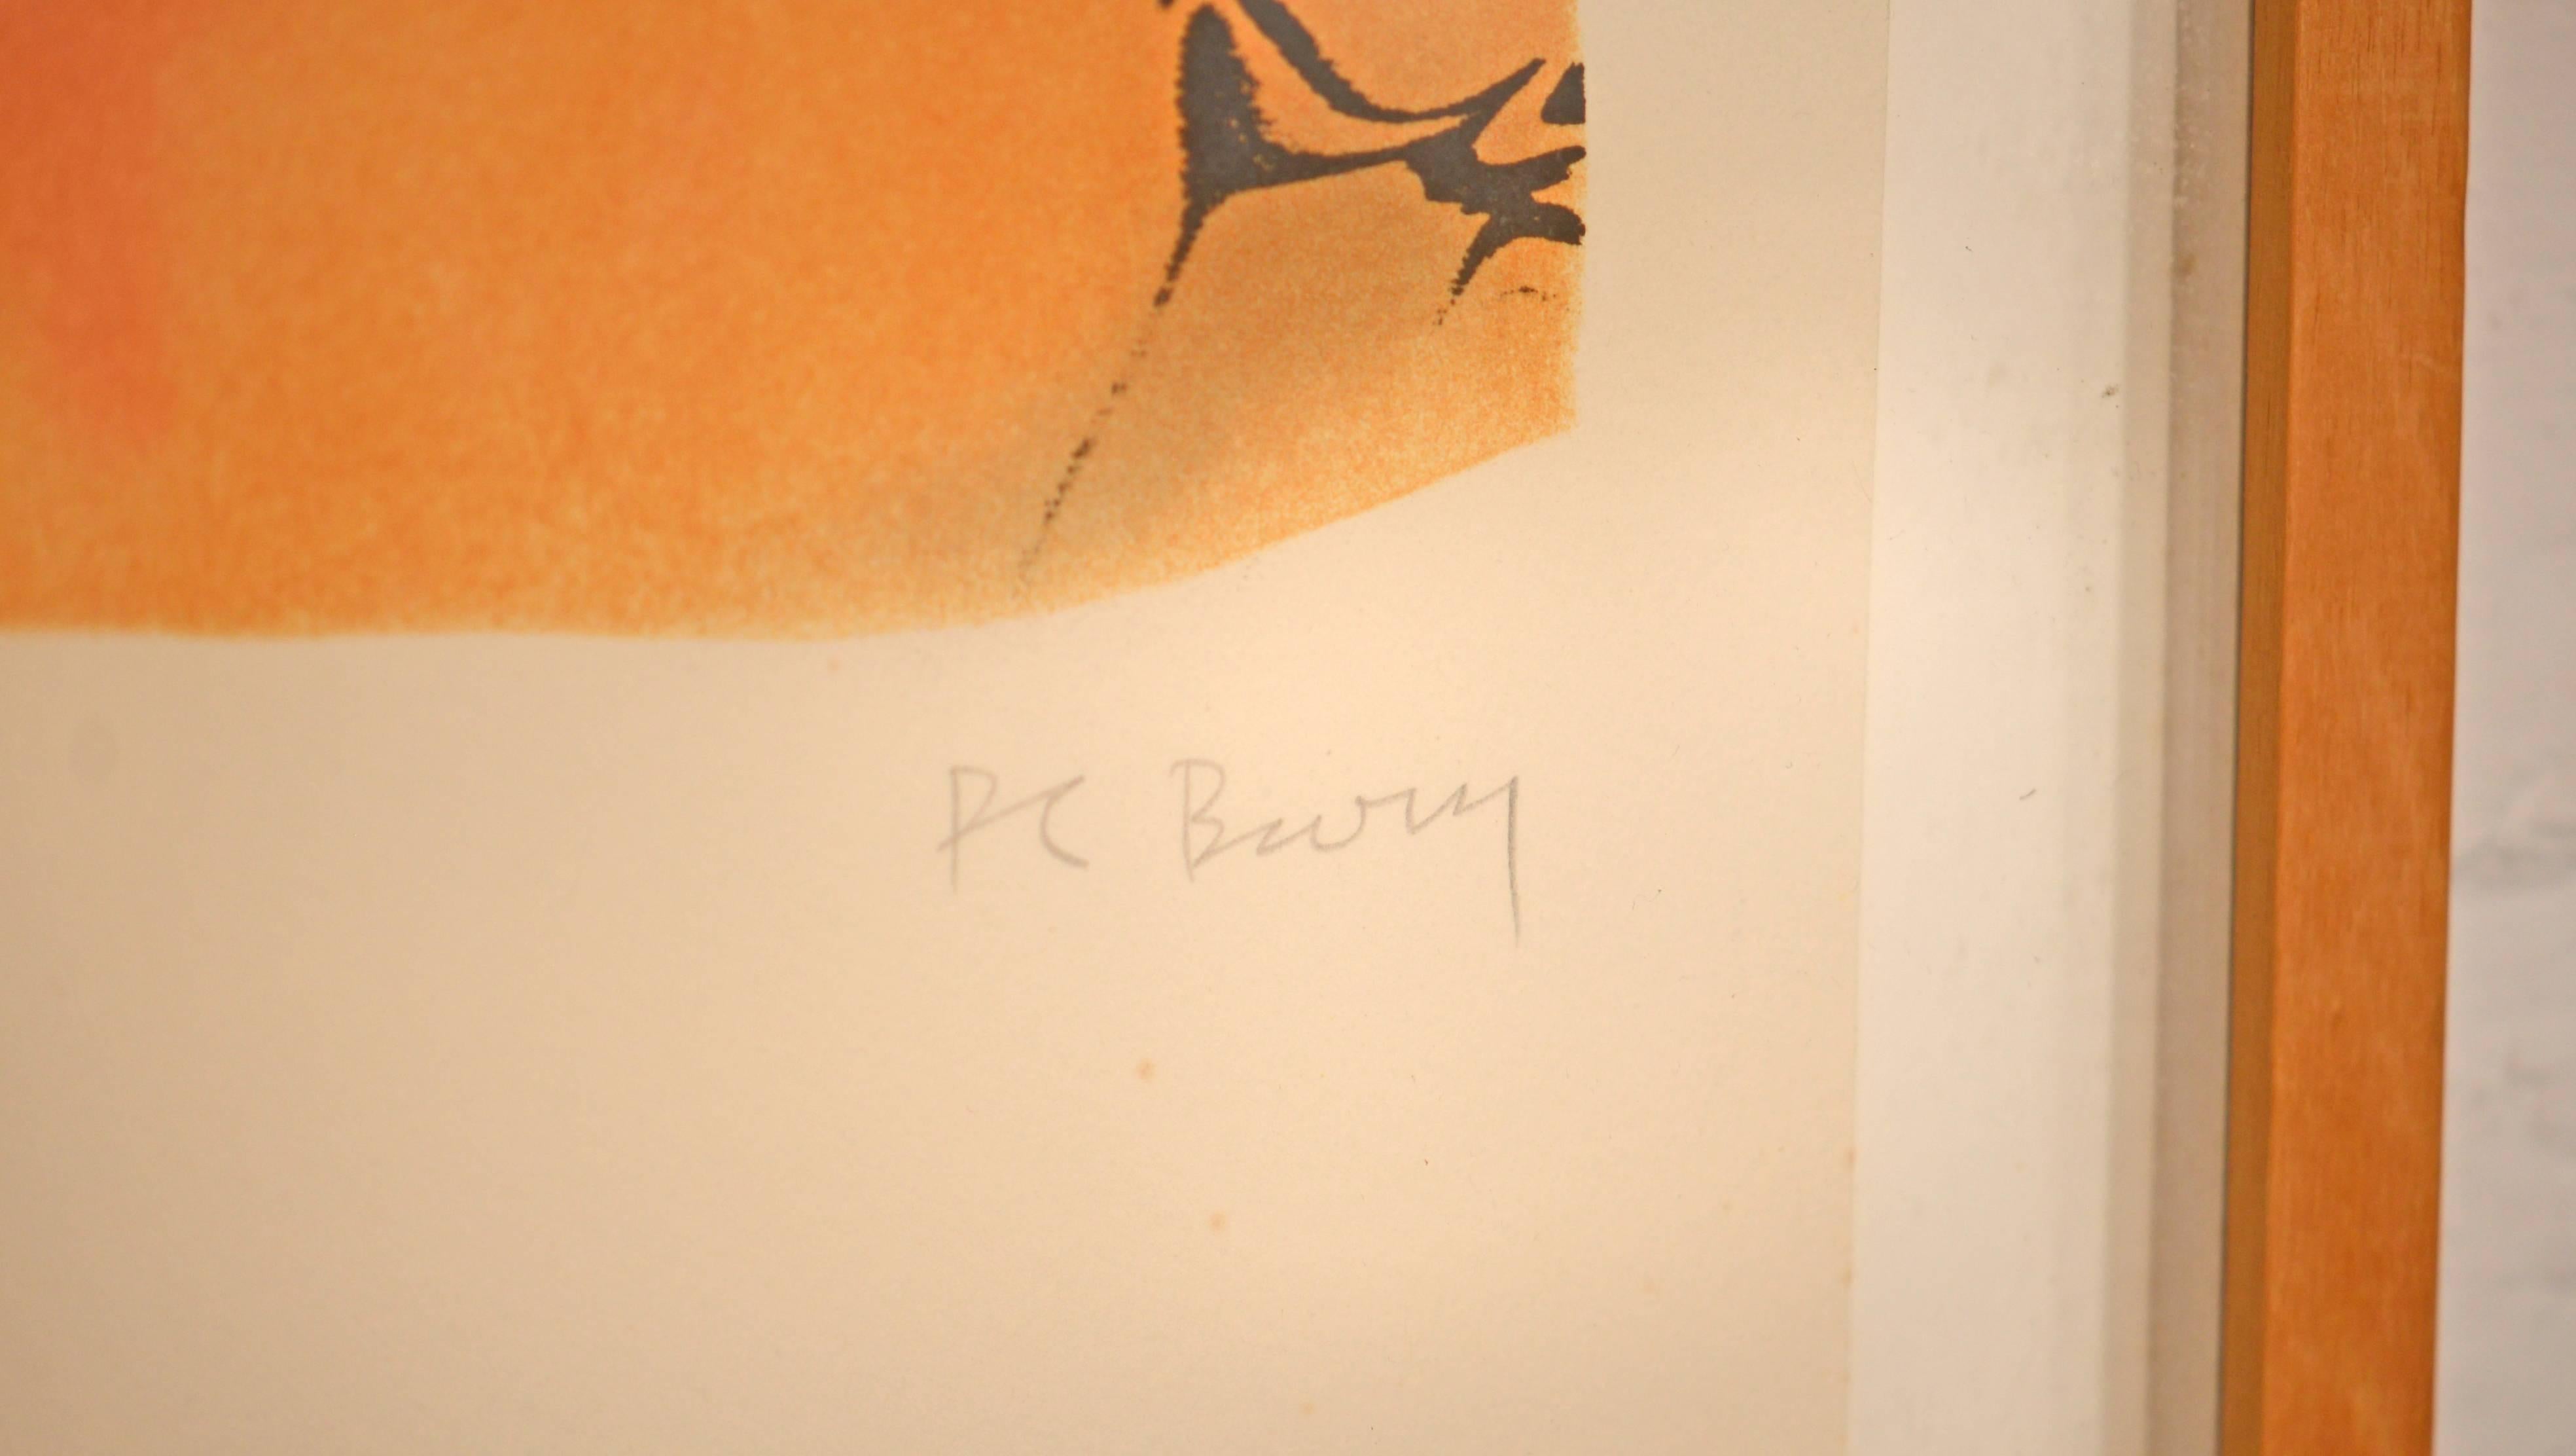 Lithography in color signed and numbered 24/70



The Belgian artist Pol Bury (1922-2005) is one of the founders of Kinetic art. After his beginnings in painting, marked by the influence of Magritte, and time spent with other members of Jeune